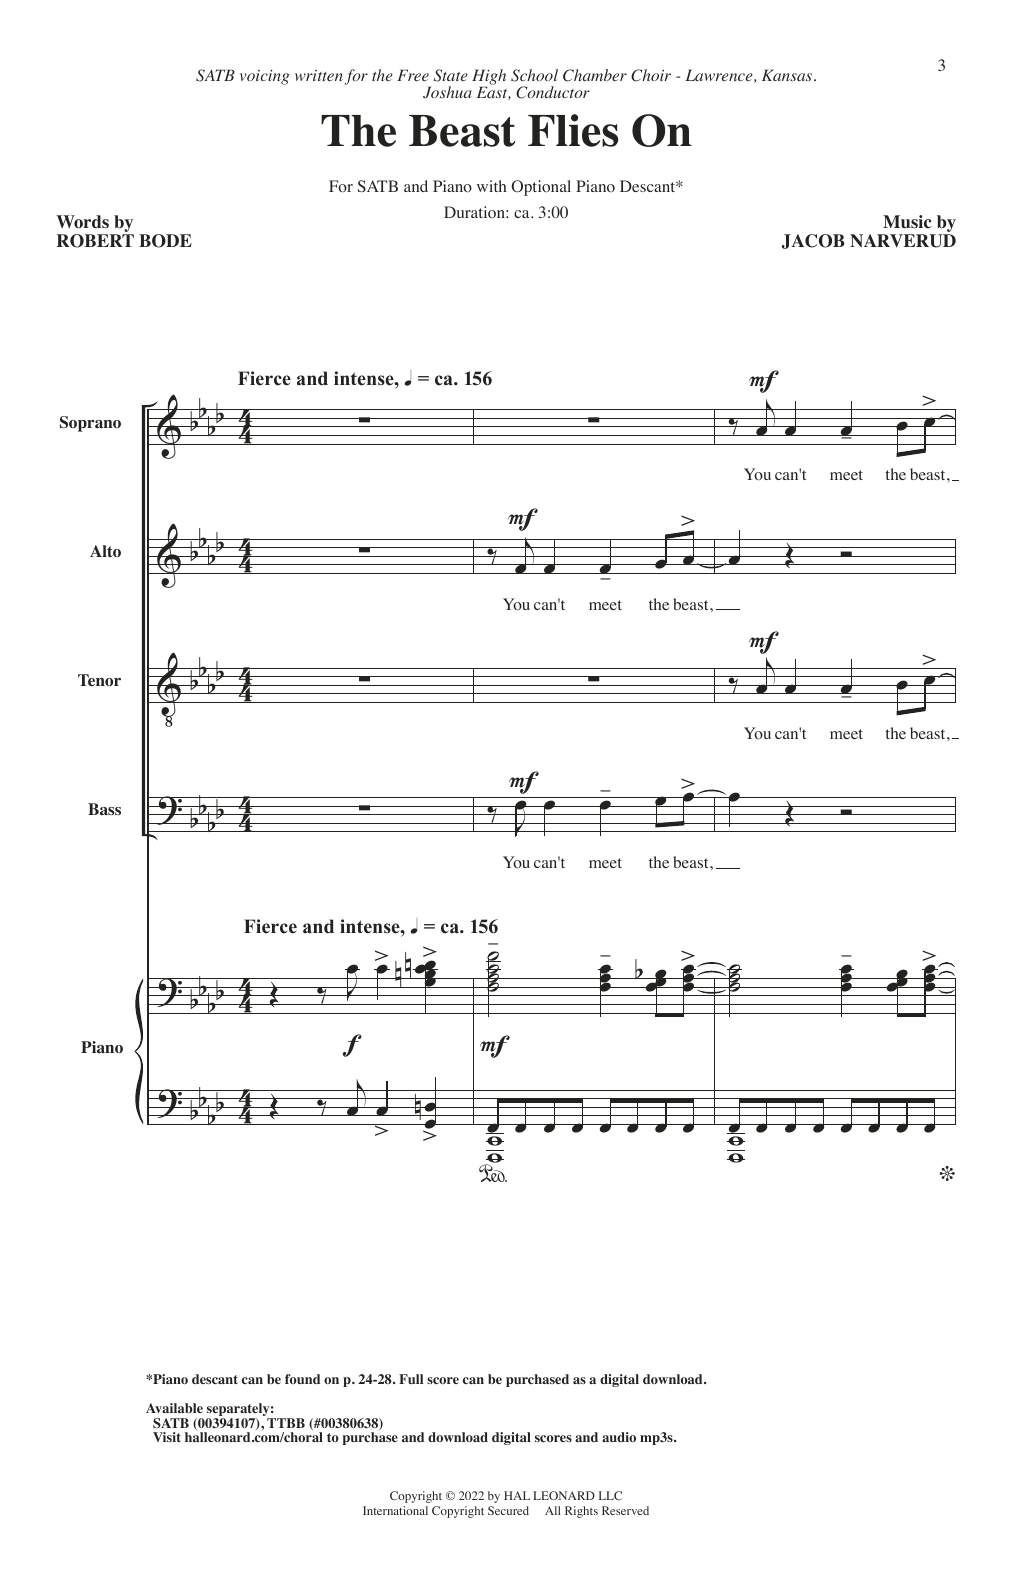 Download Robert Bode and Jacob Narverud The Beast Flies On Sheet Music